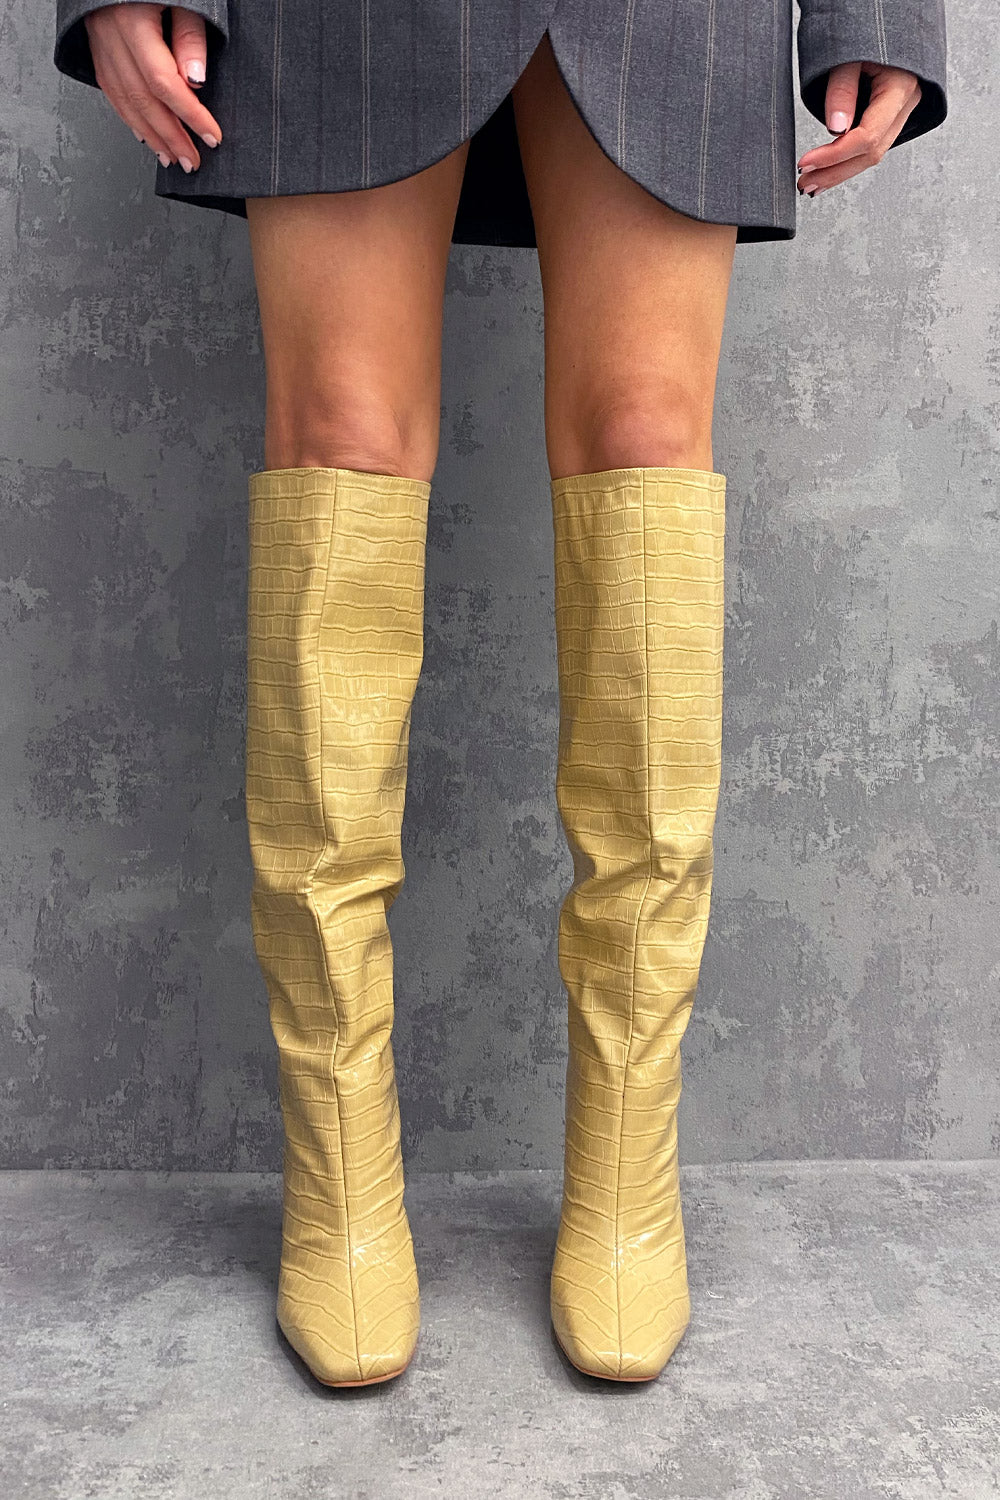 This $20 Yellow Tweed Dress Is GIVING - Fly Fierce Fab